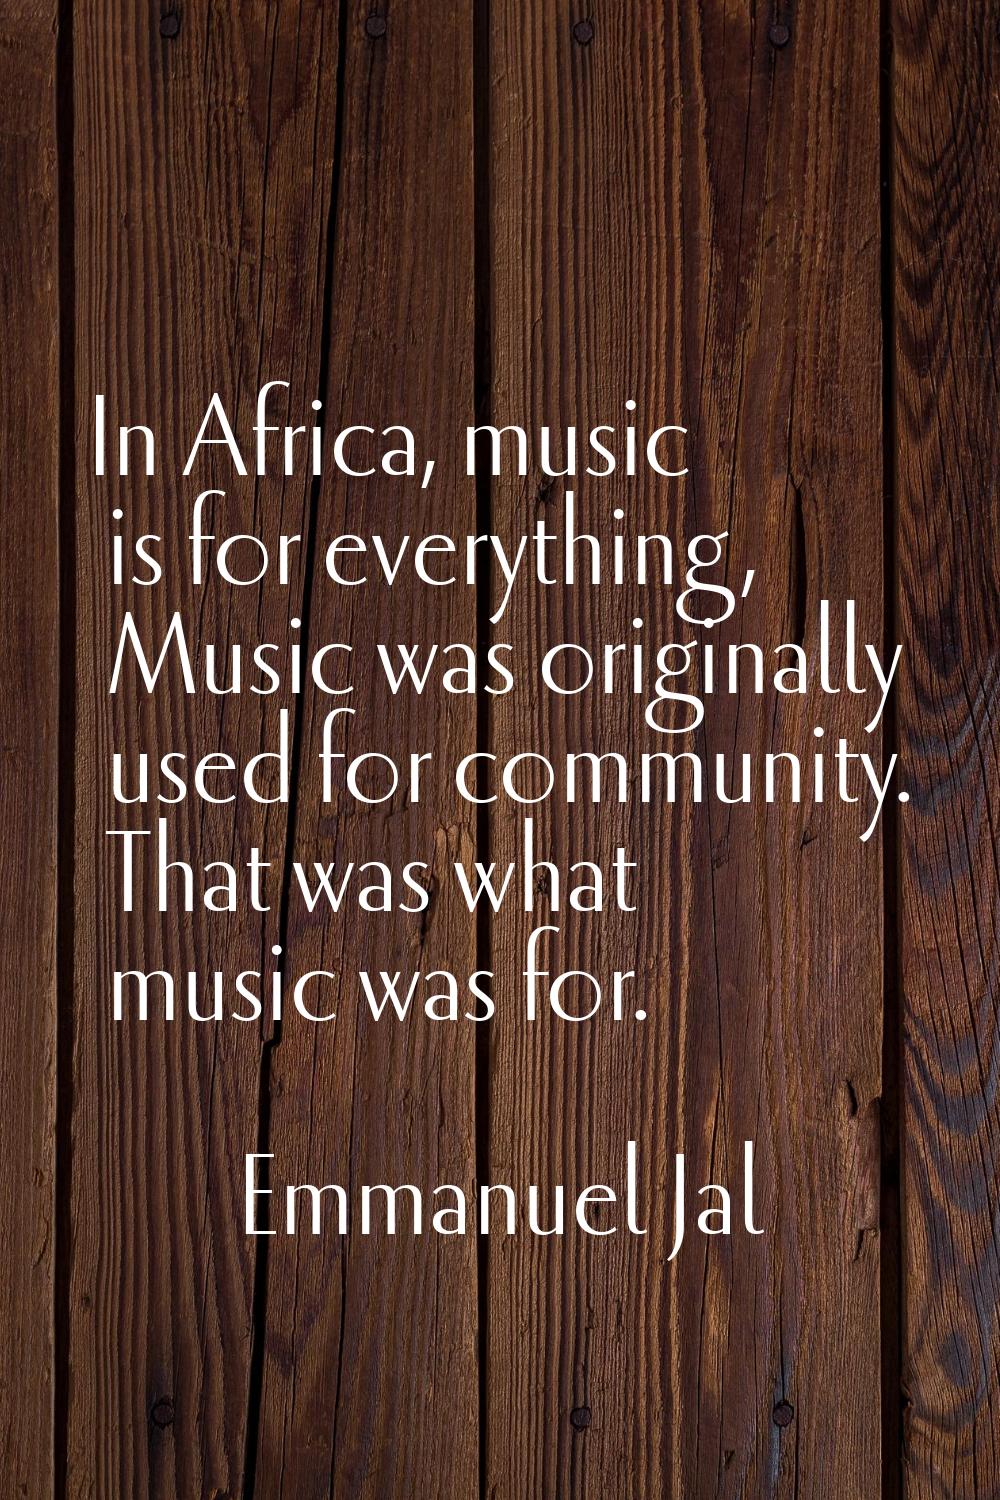 In Africa, music is for everything, Music was originally used for community. That was what music wa